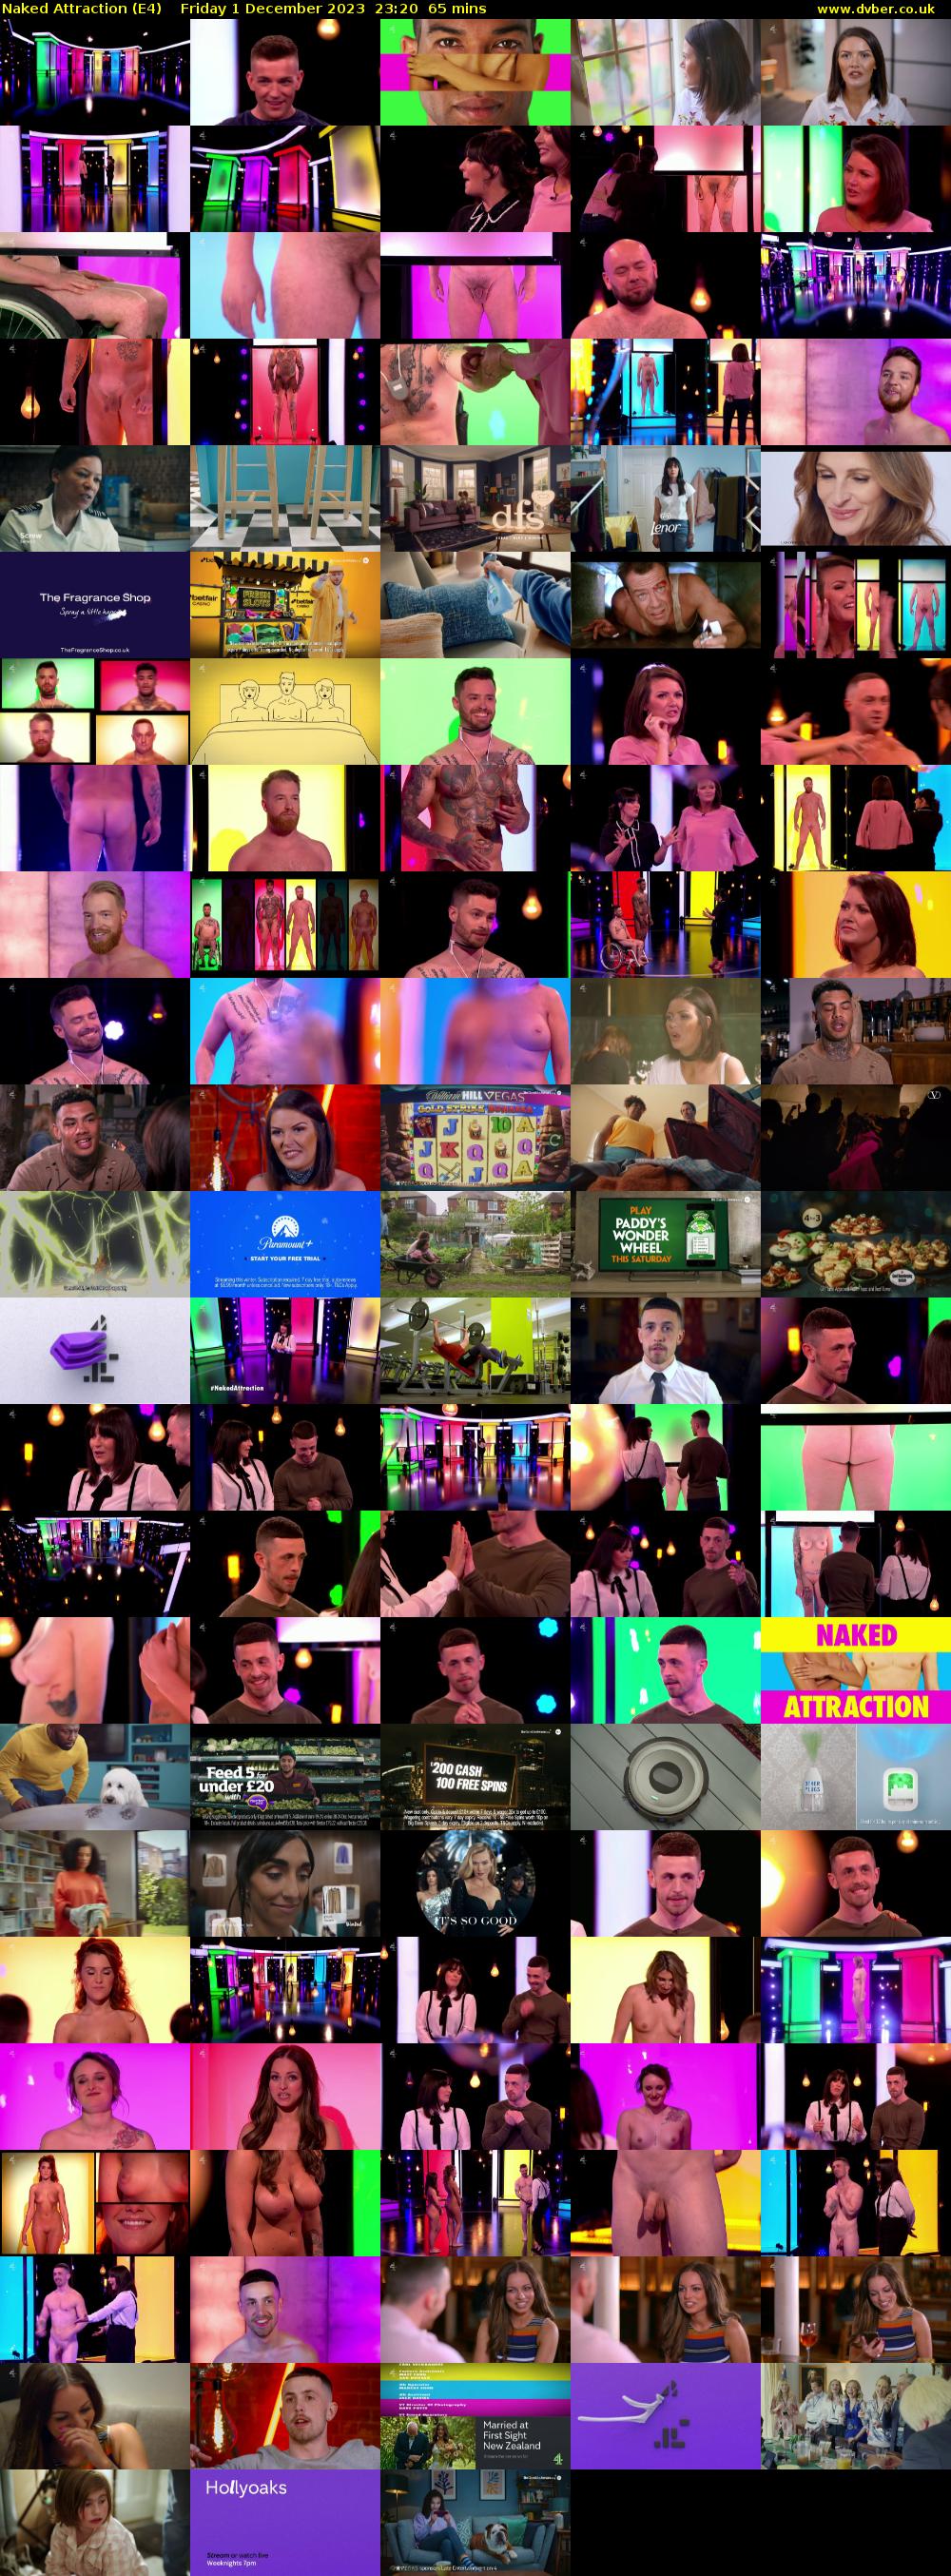 Naked Attraction (E4) Friday 1 December 2023 23:20 - 00:25